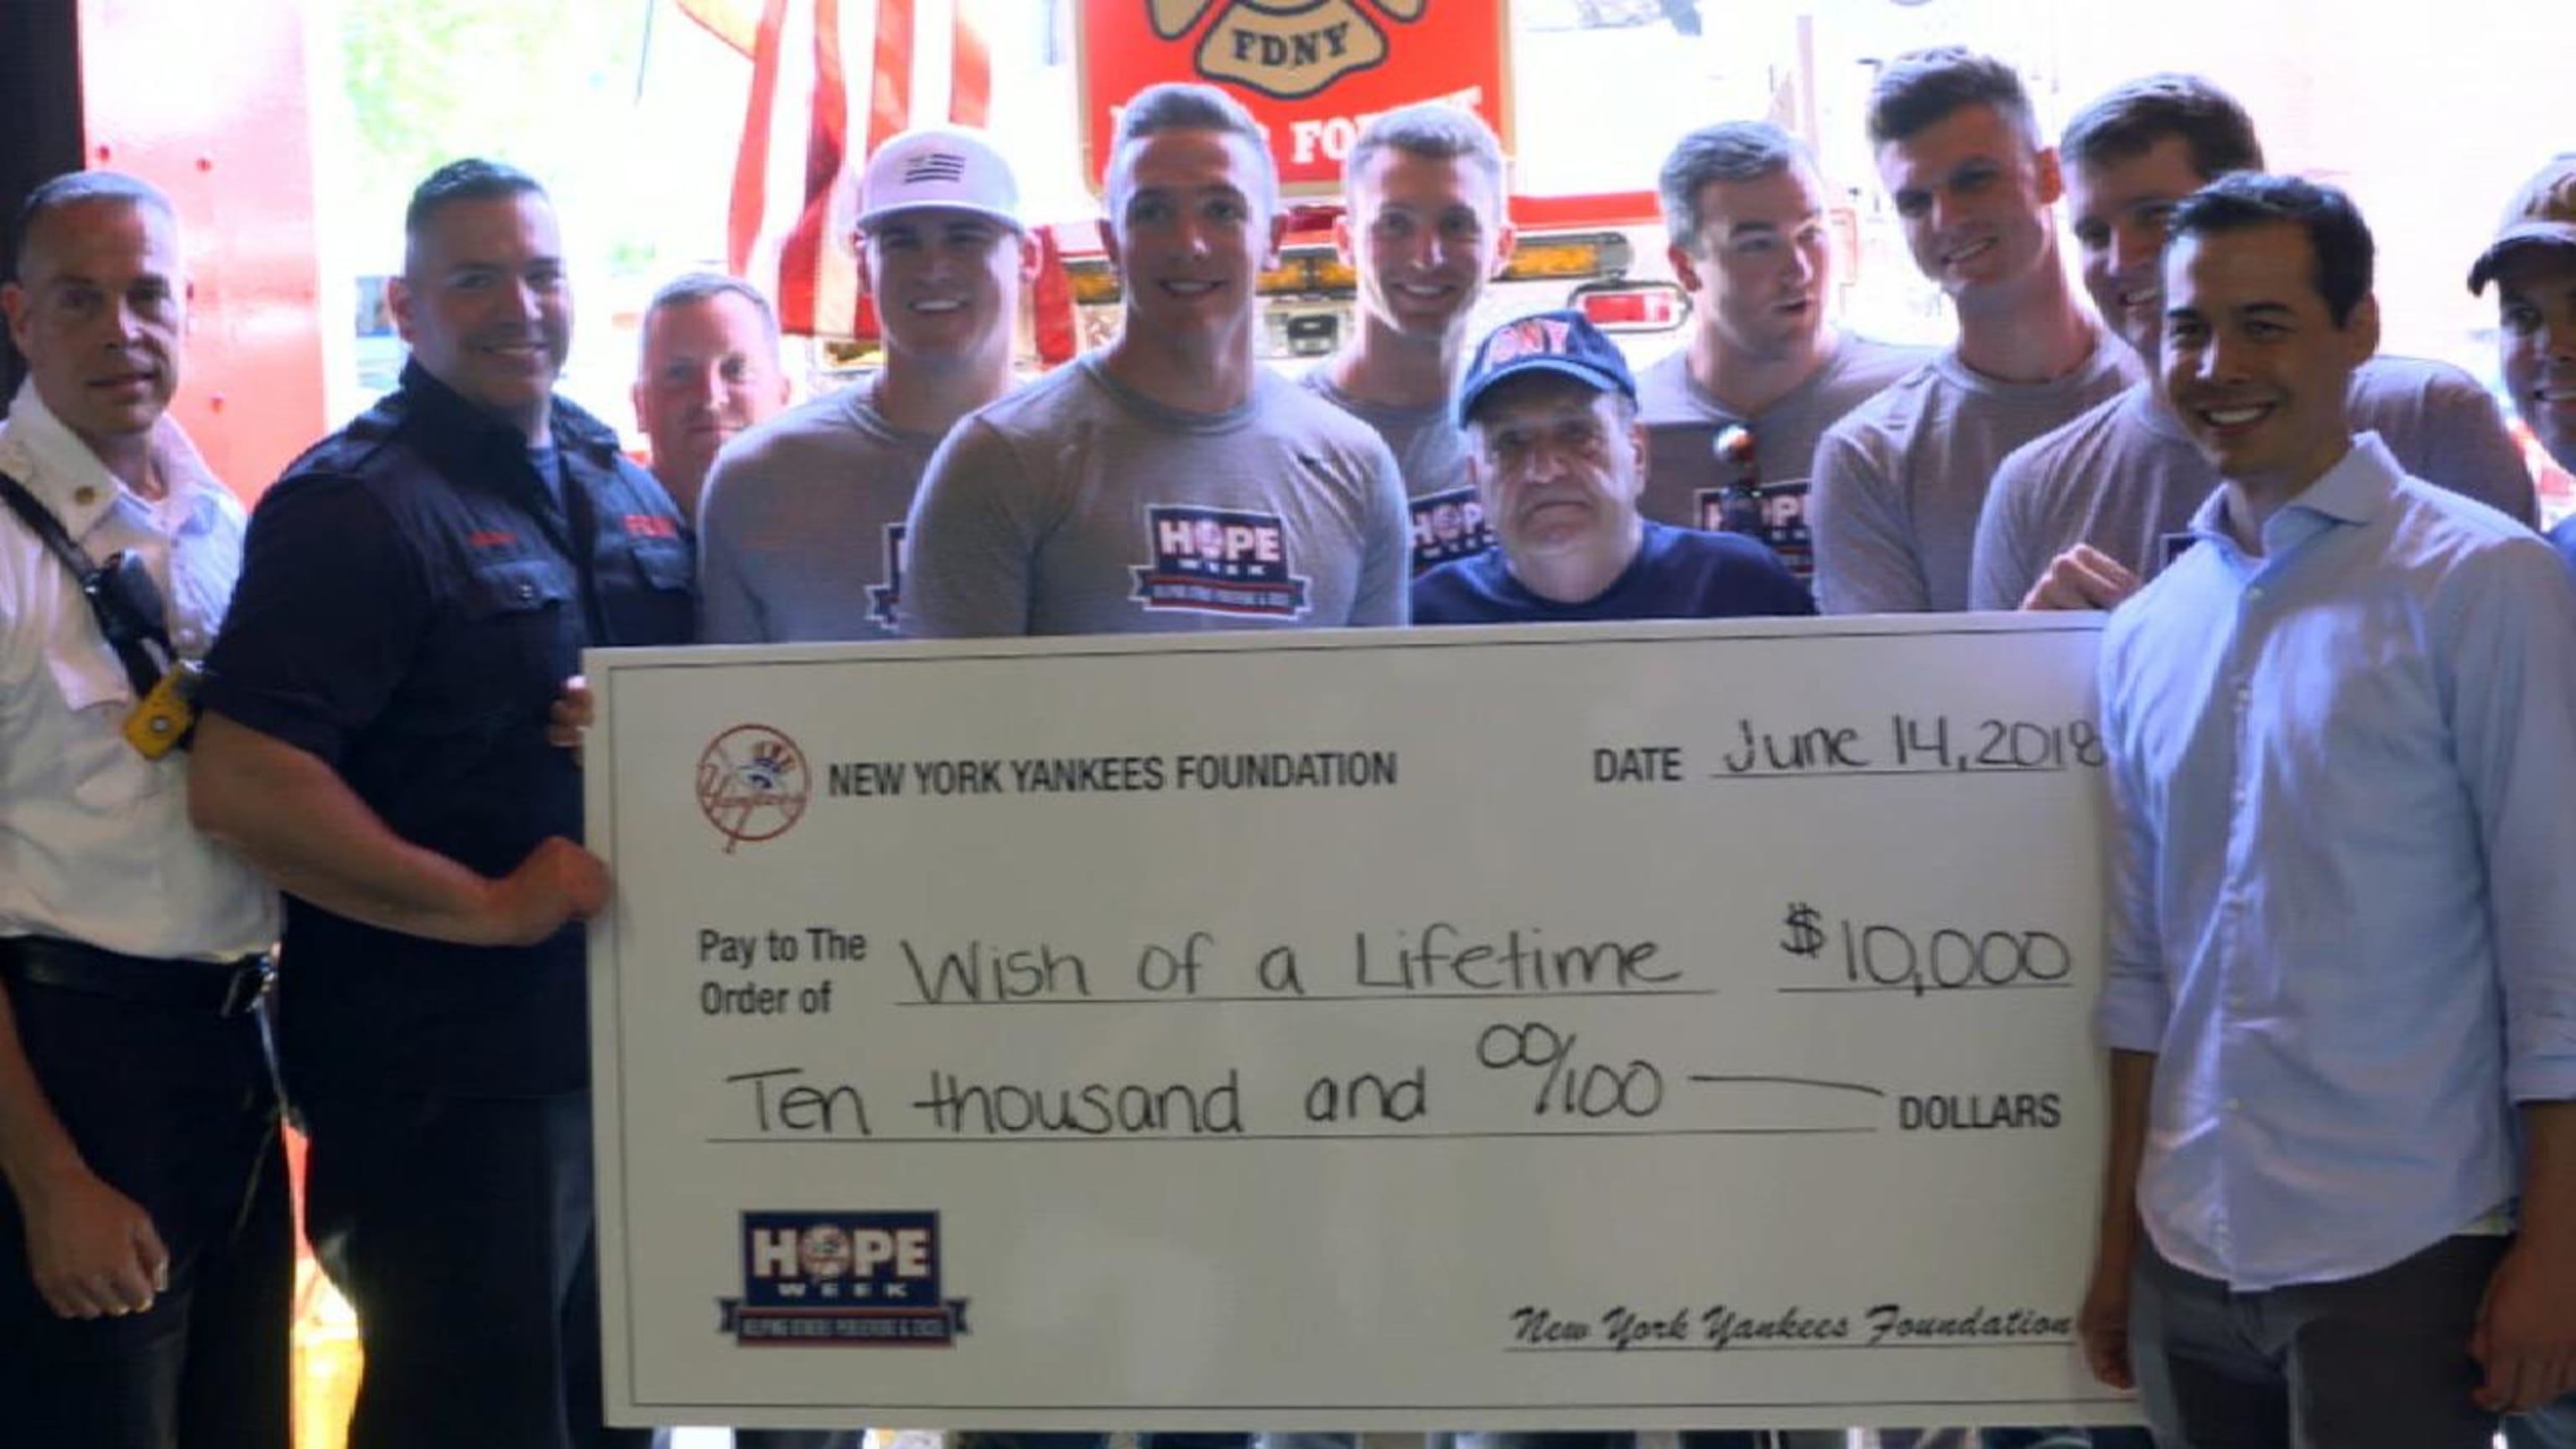 HOPE Week takes Yankees to FDNY reunion